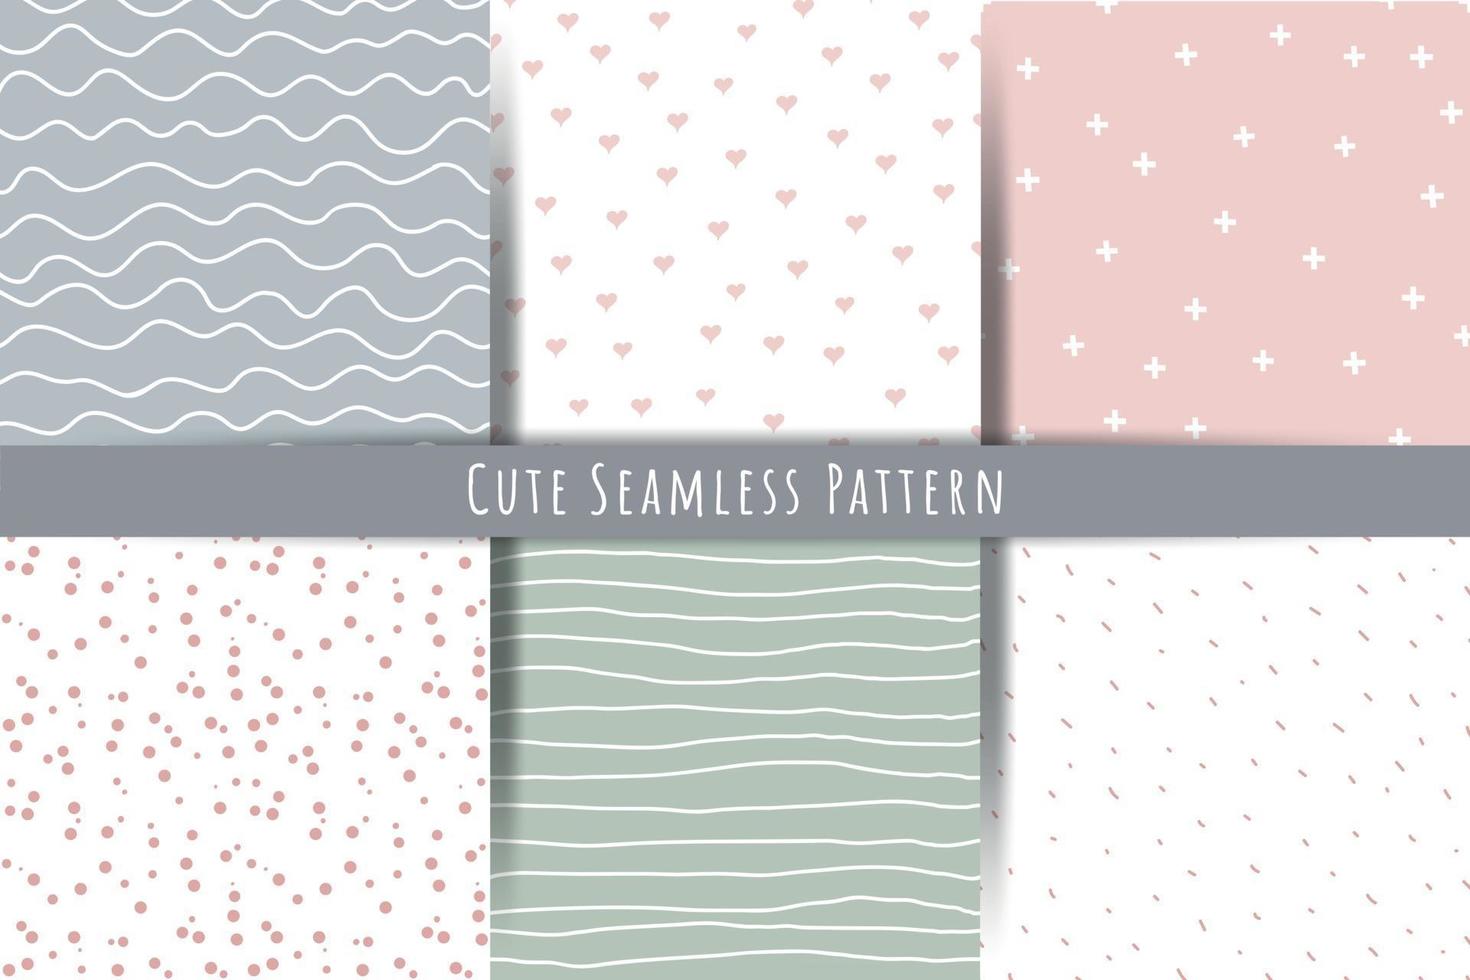 A set of simple minimalistic summer spring seamless patterns Gentle ornaments with lines drops hearts shapes vector